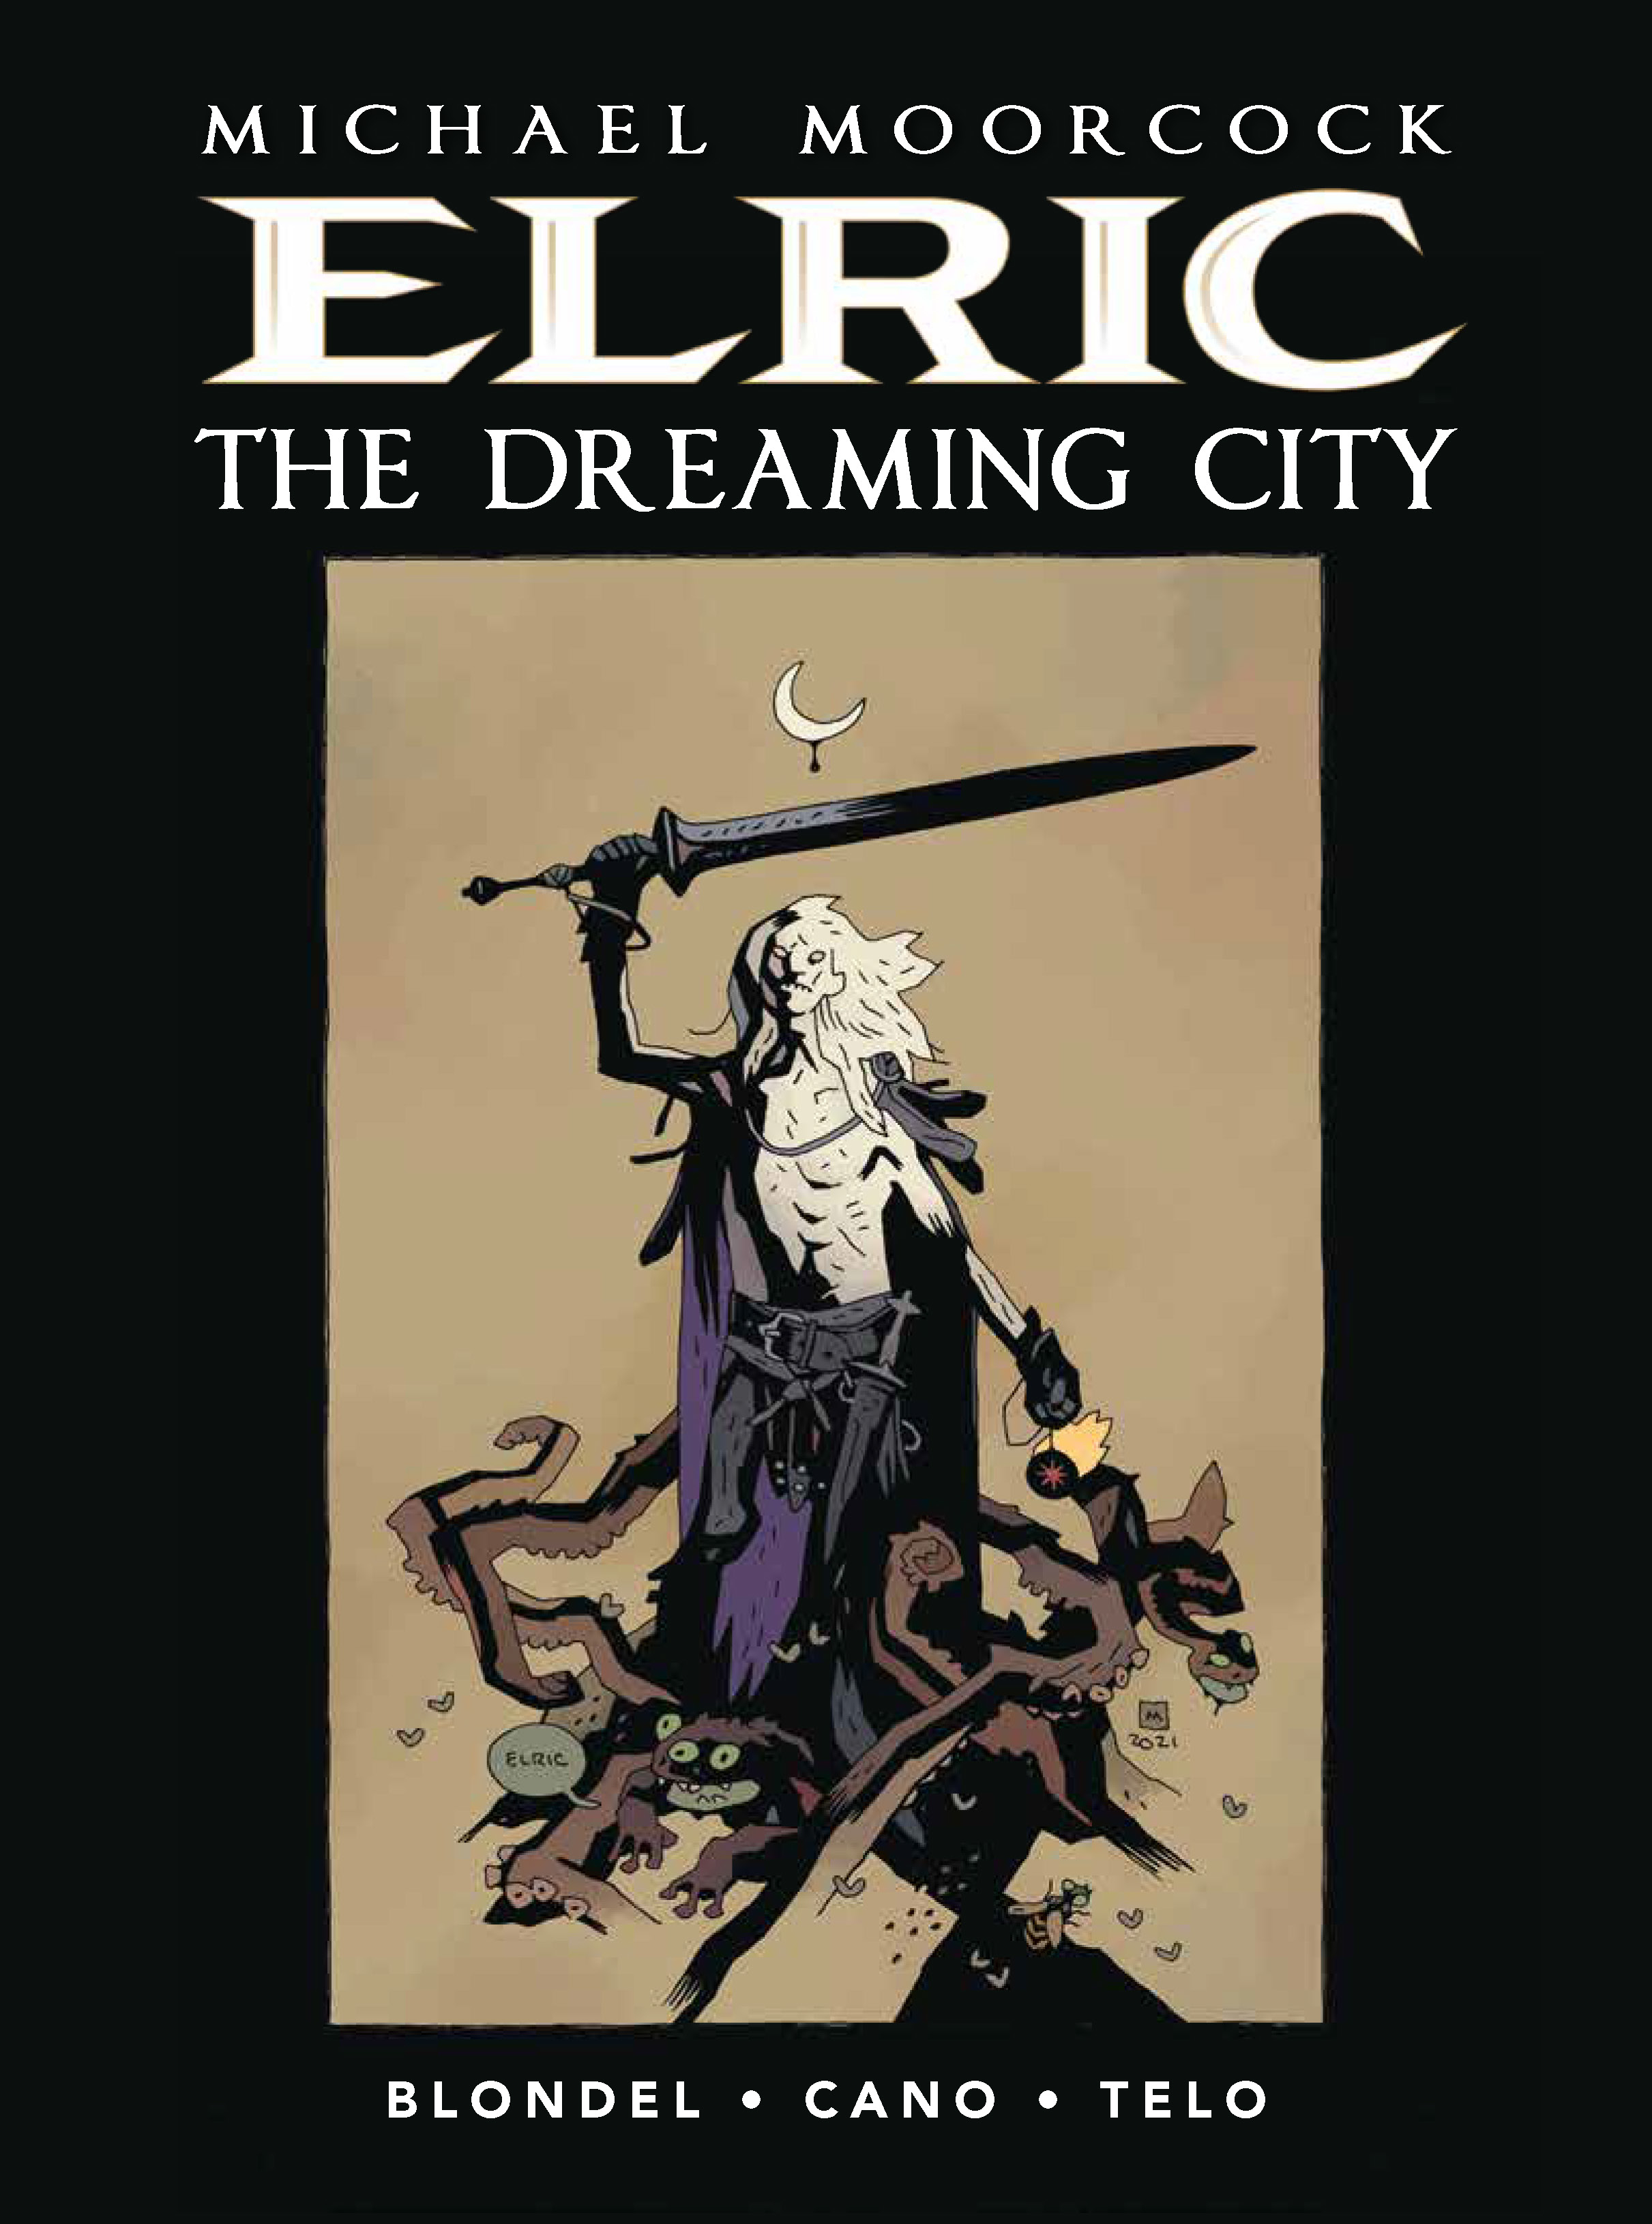 Moorcock Elric Hardcover Graphic Novel Volume 4 Dreaming City Mignola Edition (Mature)